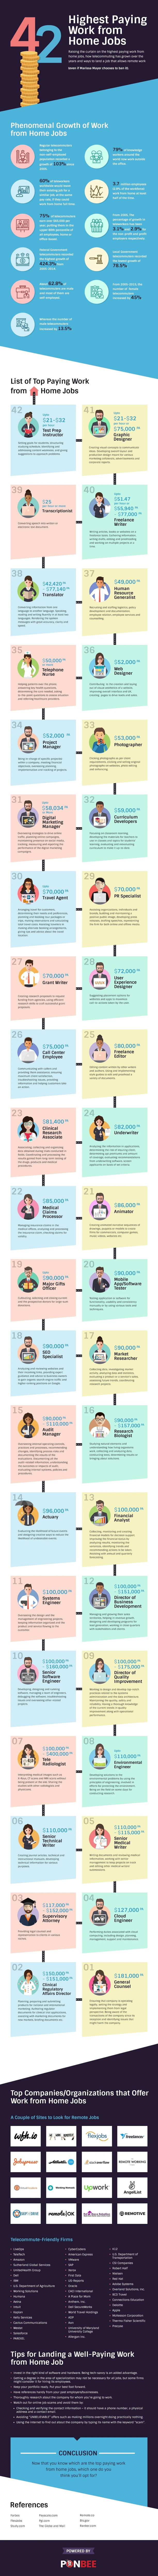 42 Highest Paying Work from Home Jobs - #infographic